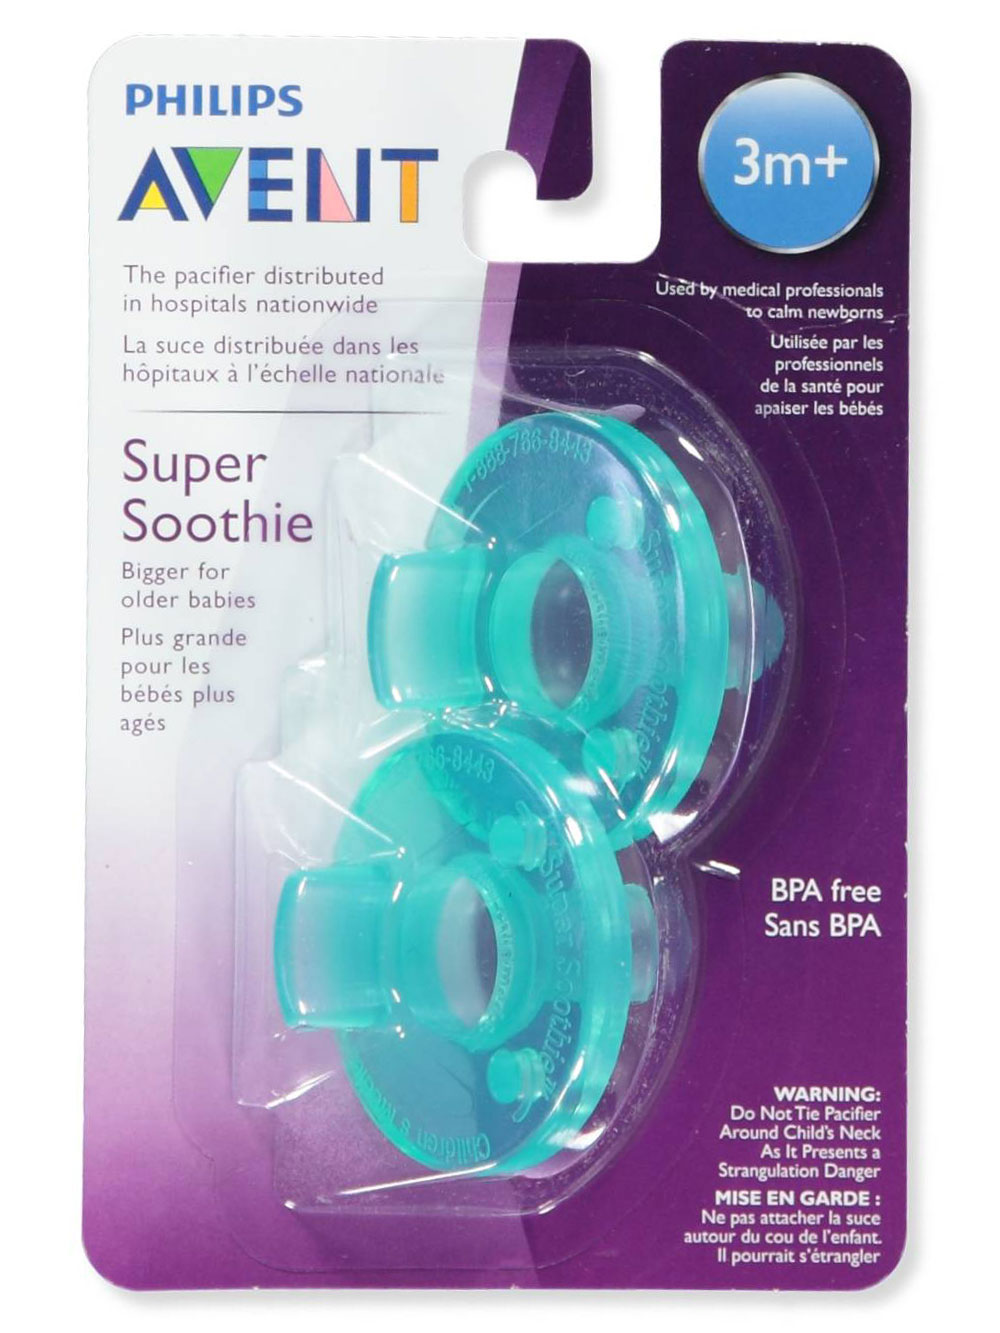 Philips AVENT Super Soothie Pacifier 3m+ Green 2pcs / フィリップス アヴェント 赤ちゃん用おしゃぶり 3か月以上用 [グリーン] 2個入り